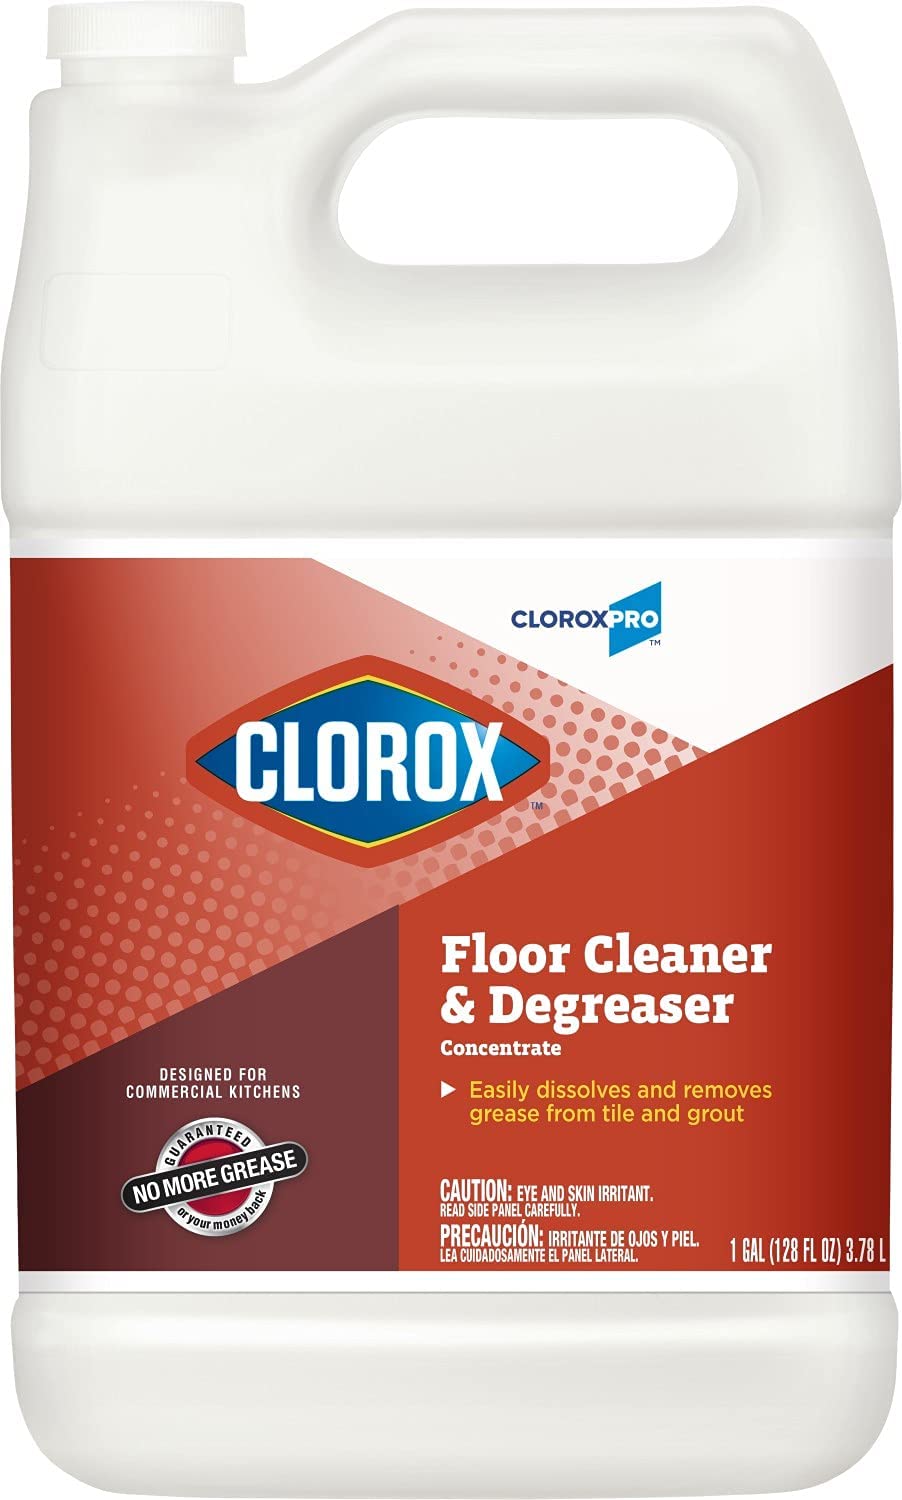 https://www.dontwasteyourmoney.com/wp-content/uploads/2022/08/cloroxpro-commercial-no-rinse-mopping-solution-mopping-solution.jpg